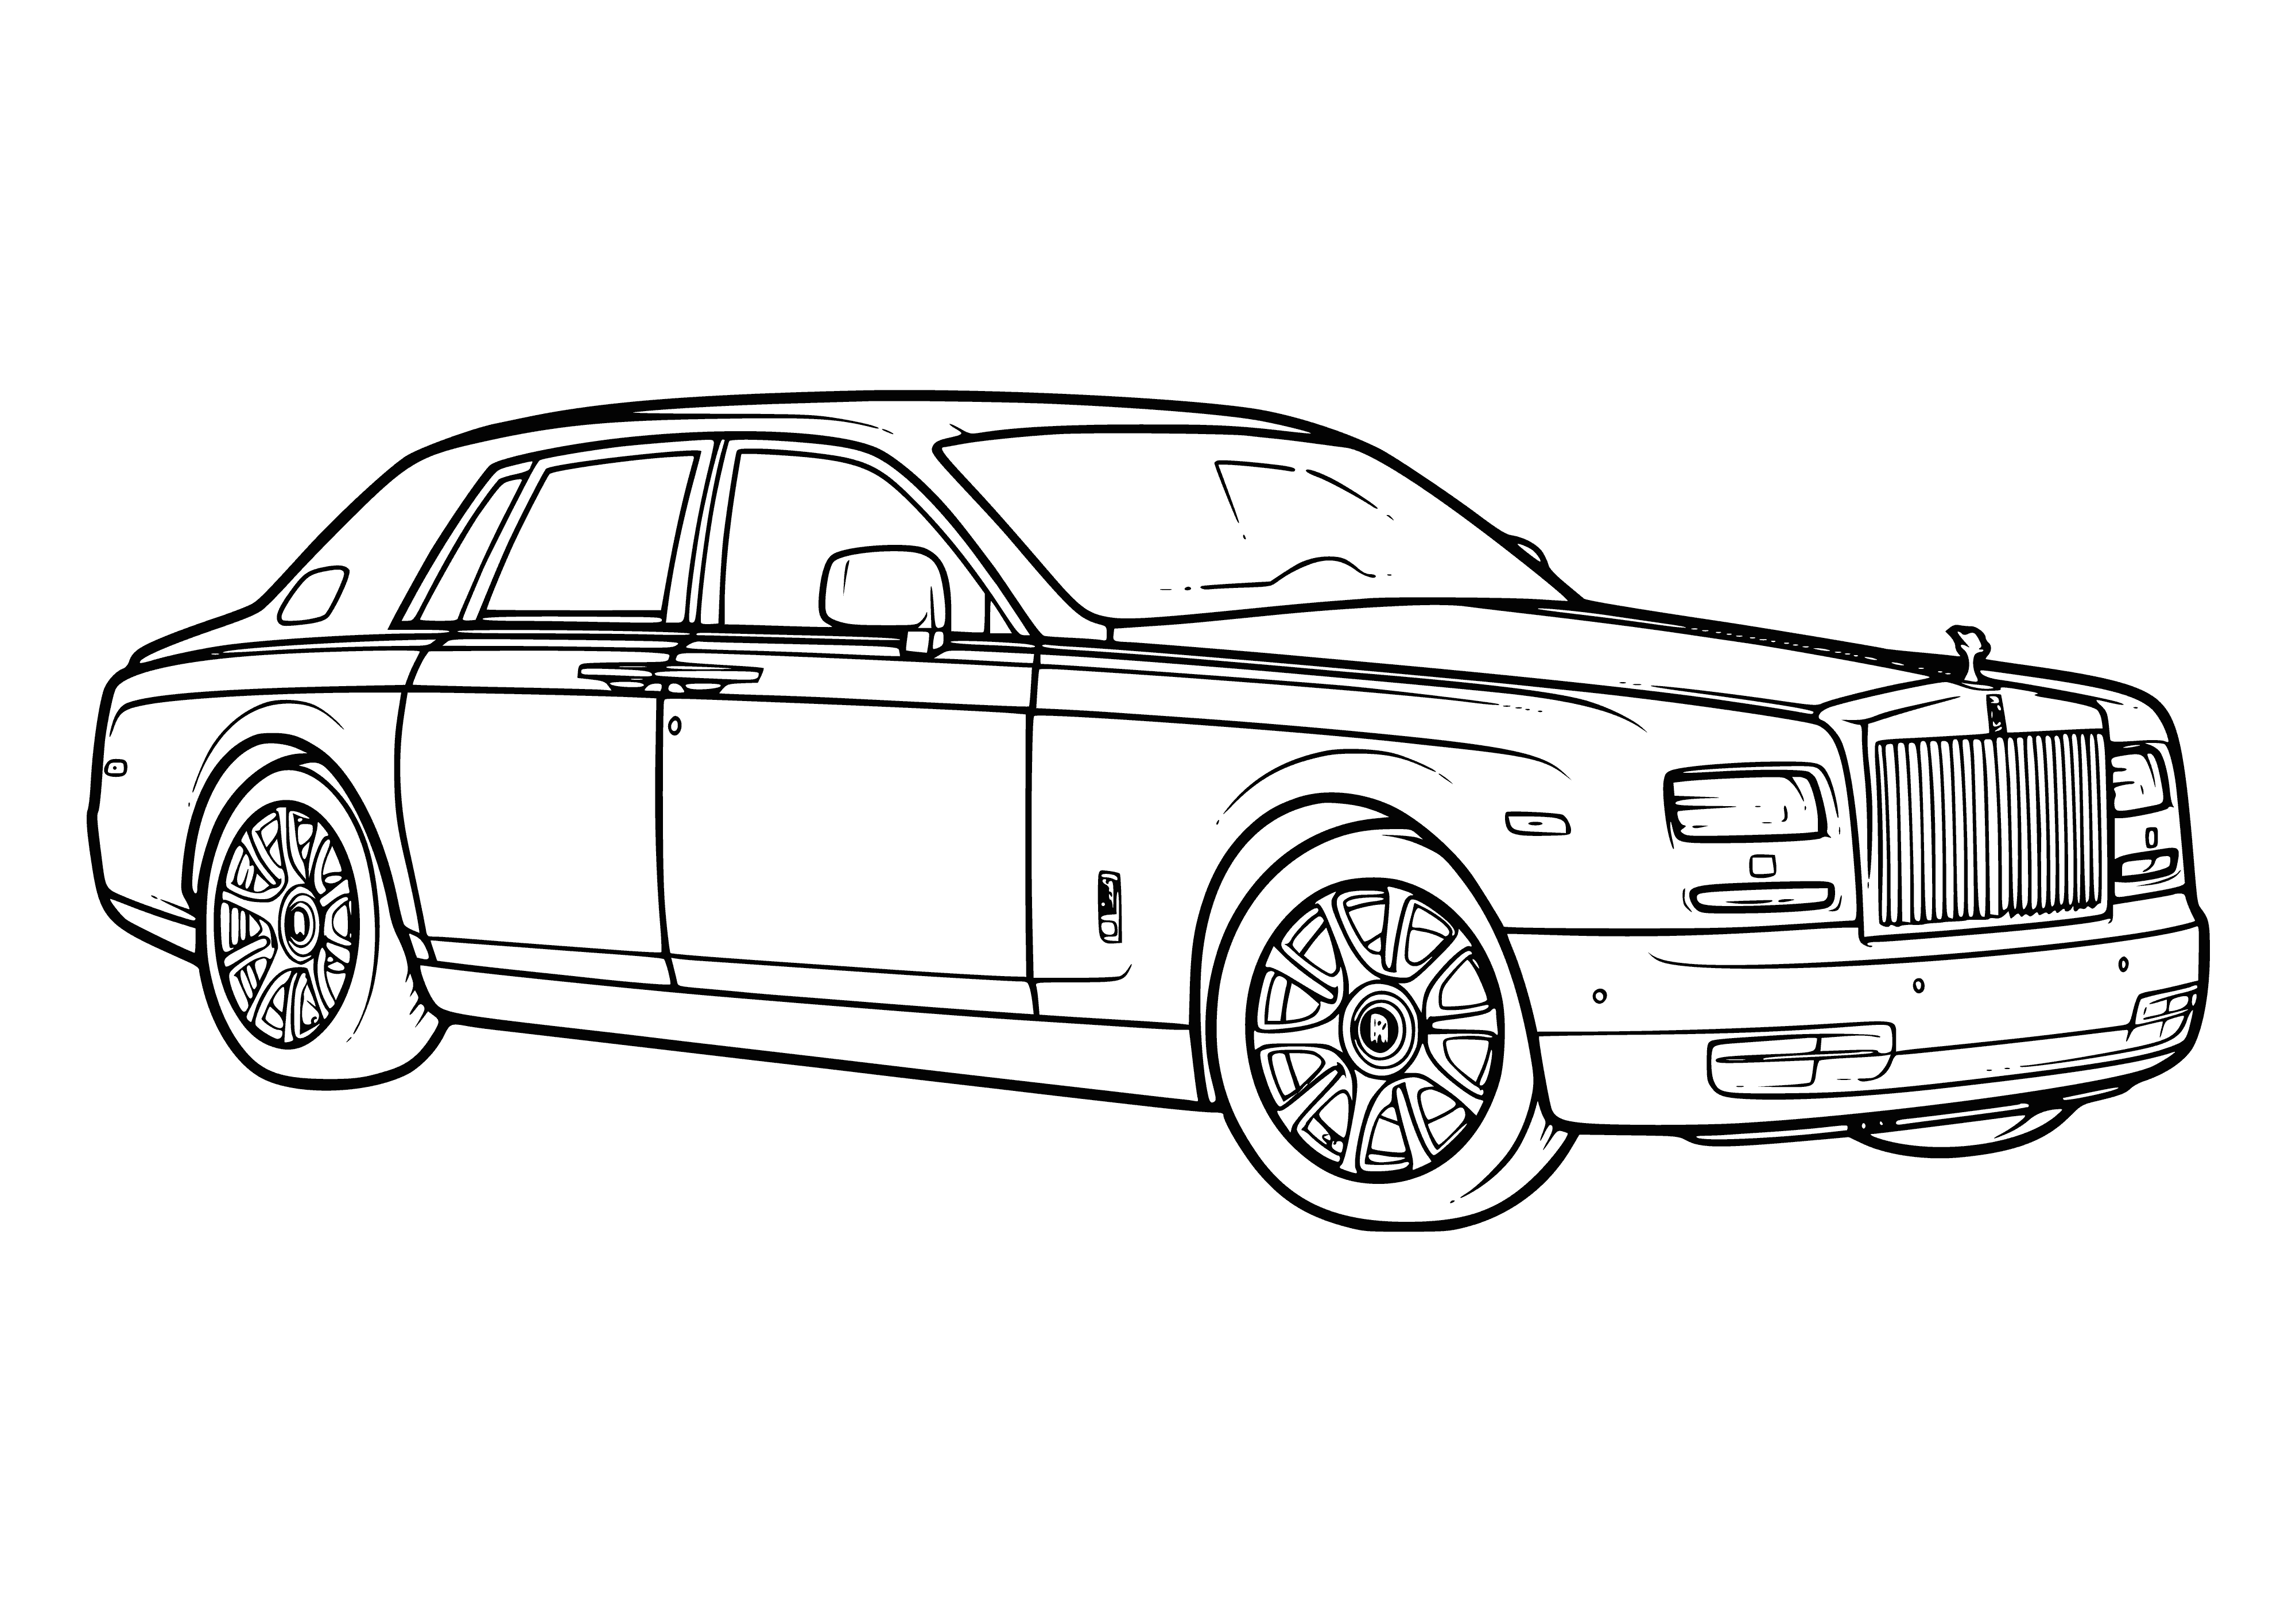 coloring page: Parked Rolls-Royce Phantom has long, sleek body, convertible top, large grille, round headlights, chrome details, and black-and-white leather seats.